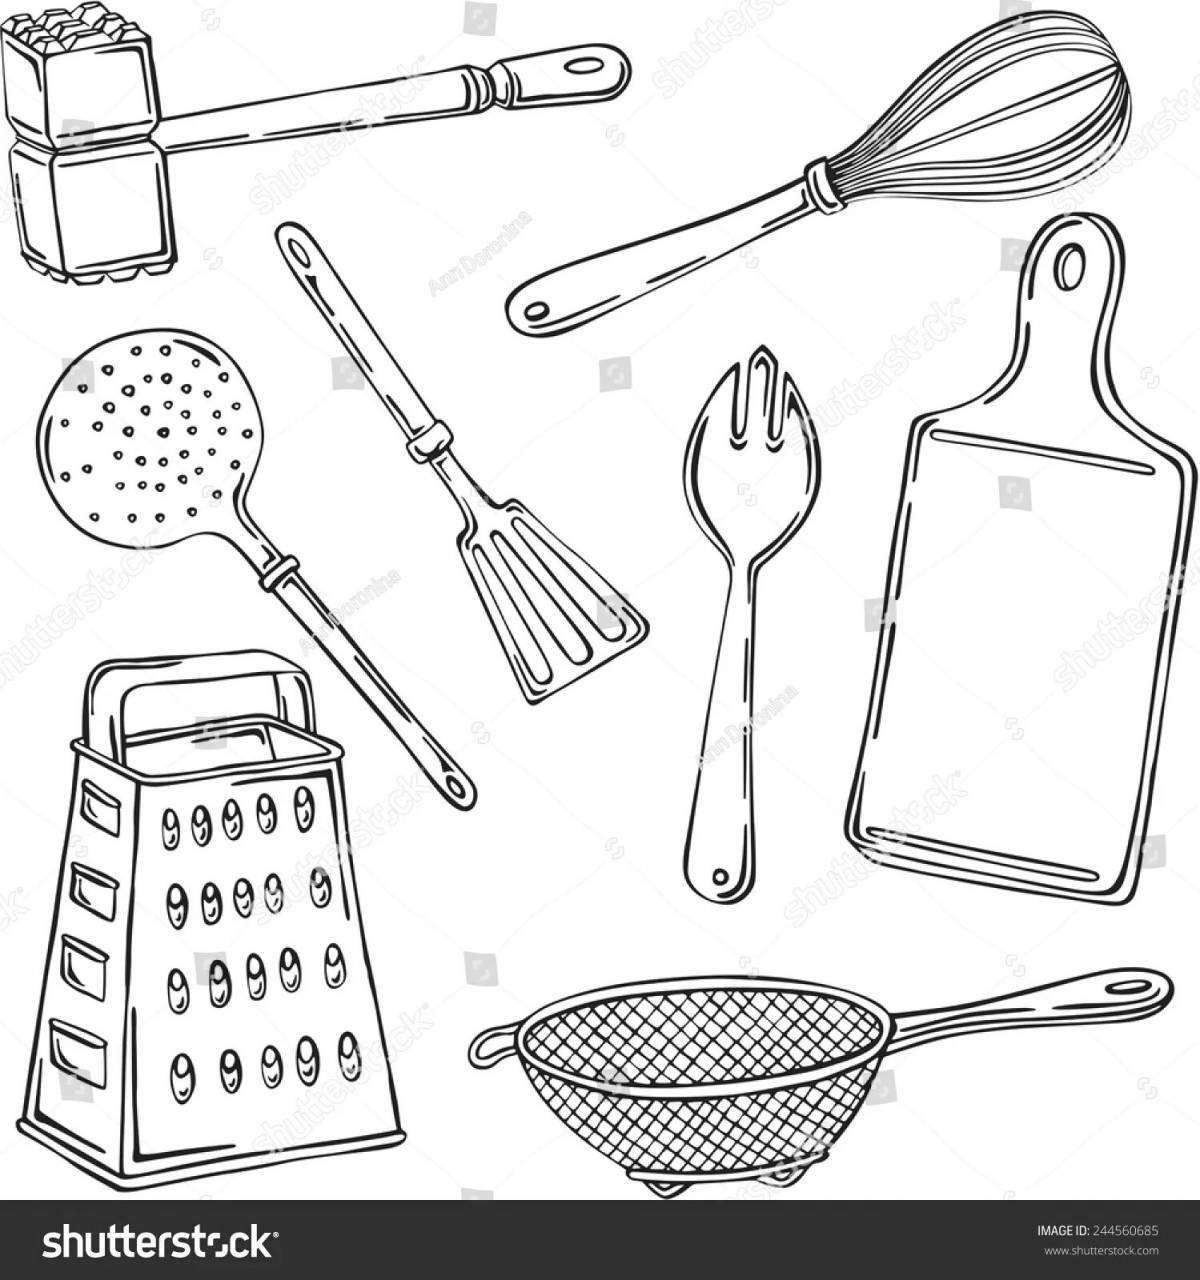 Colorful kitchen utensils coloring page for kids